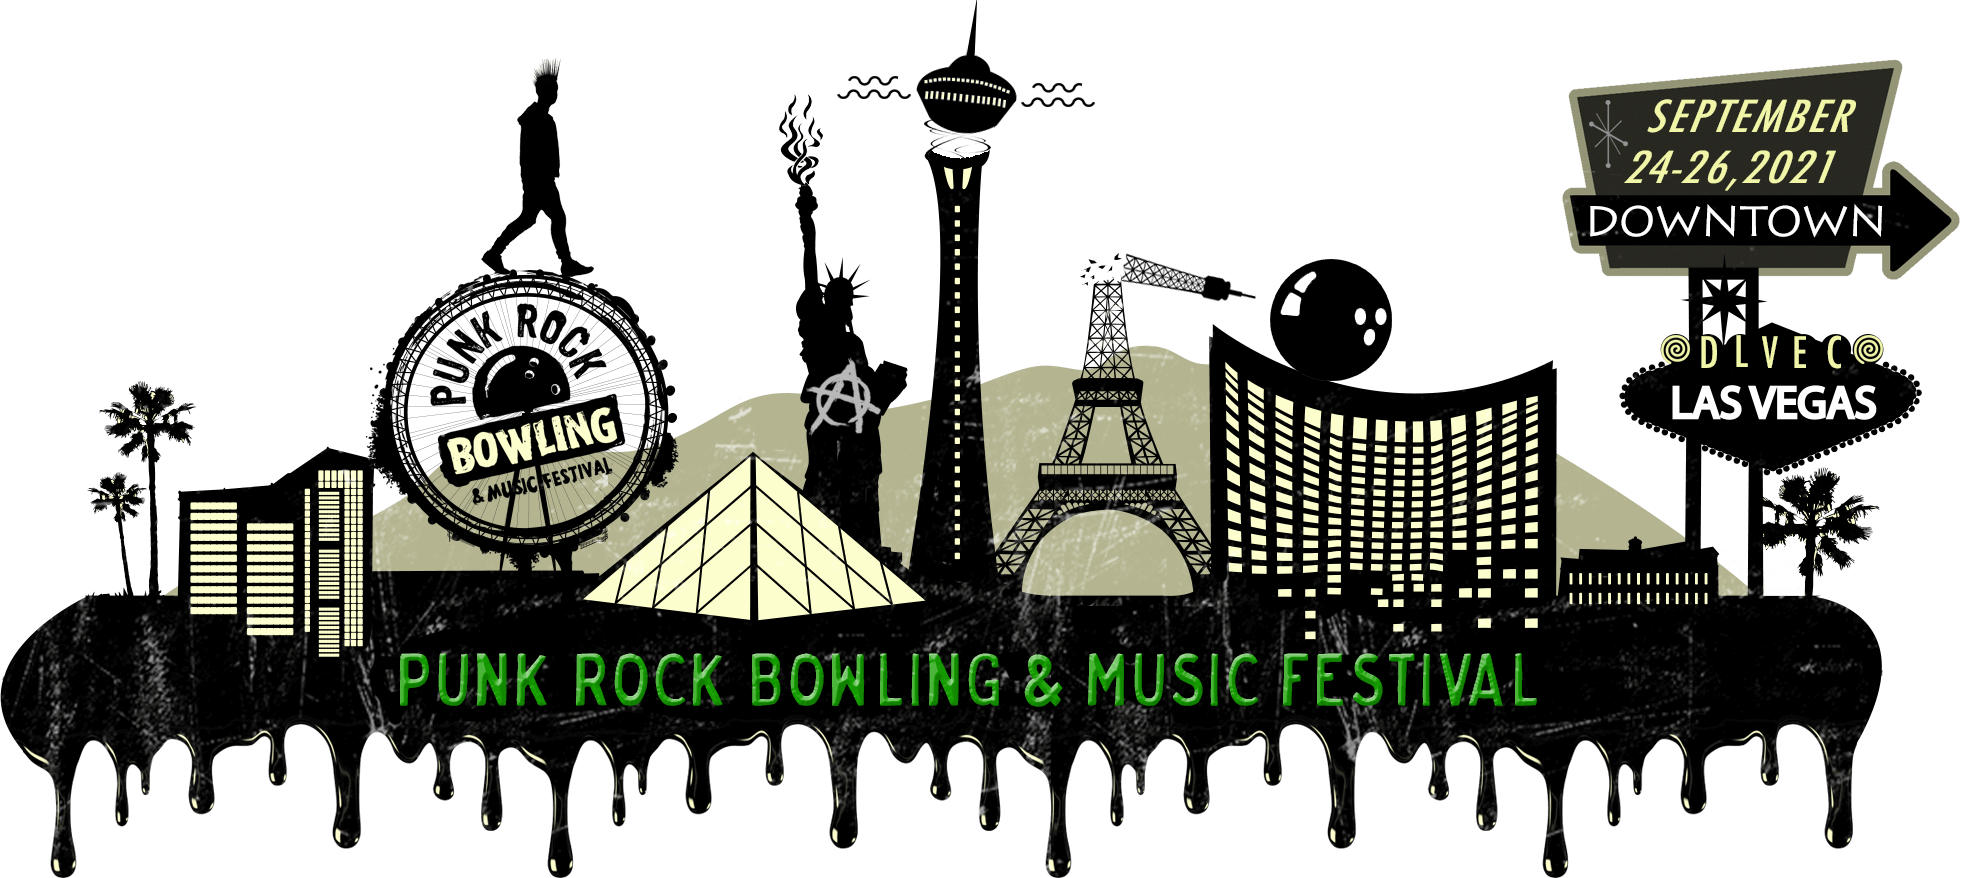 Punk Rock Bowling has been rescheduled for September 2426, 2021, and